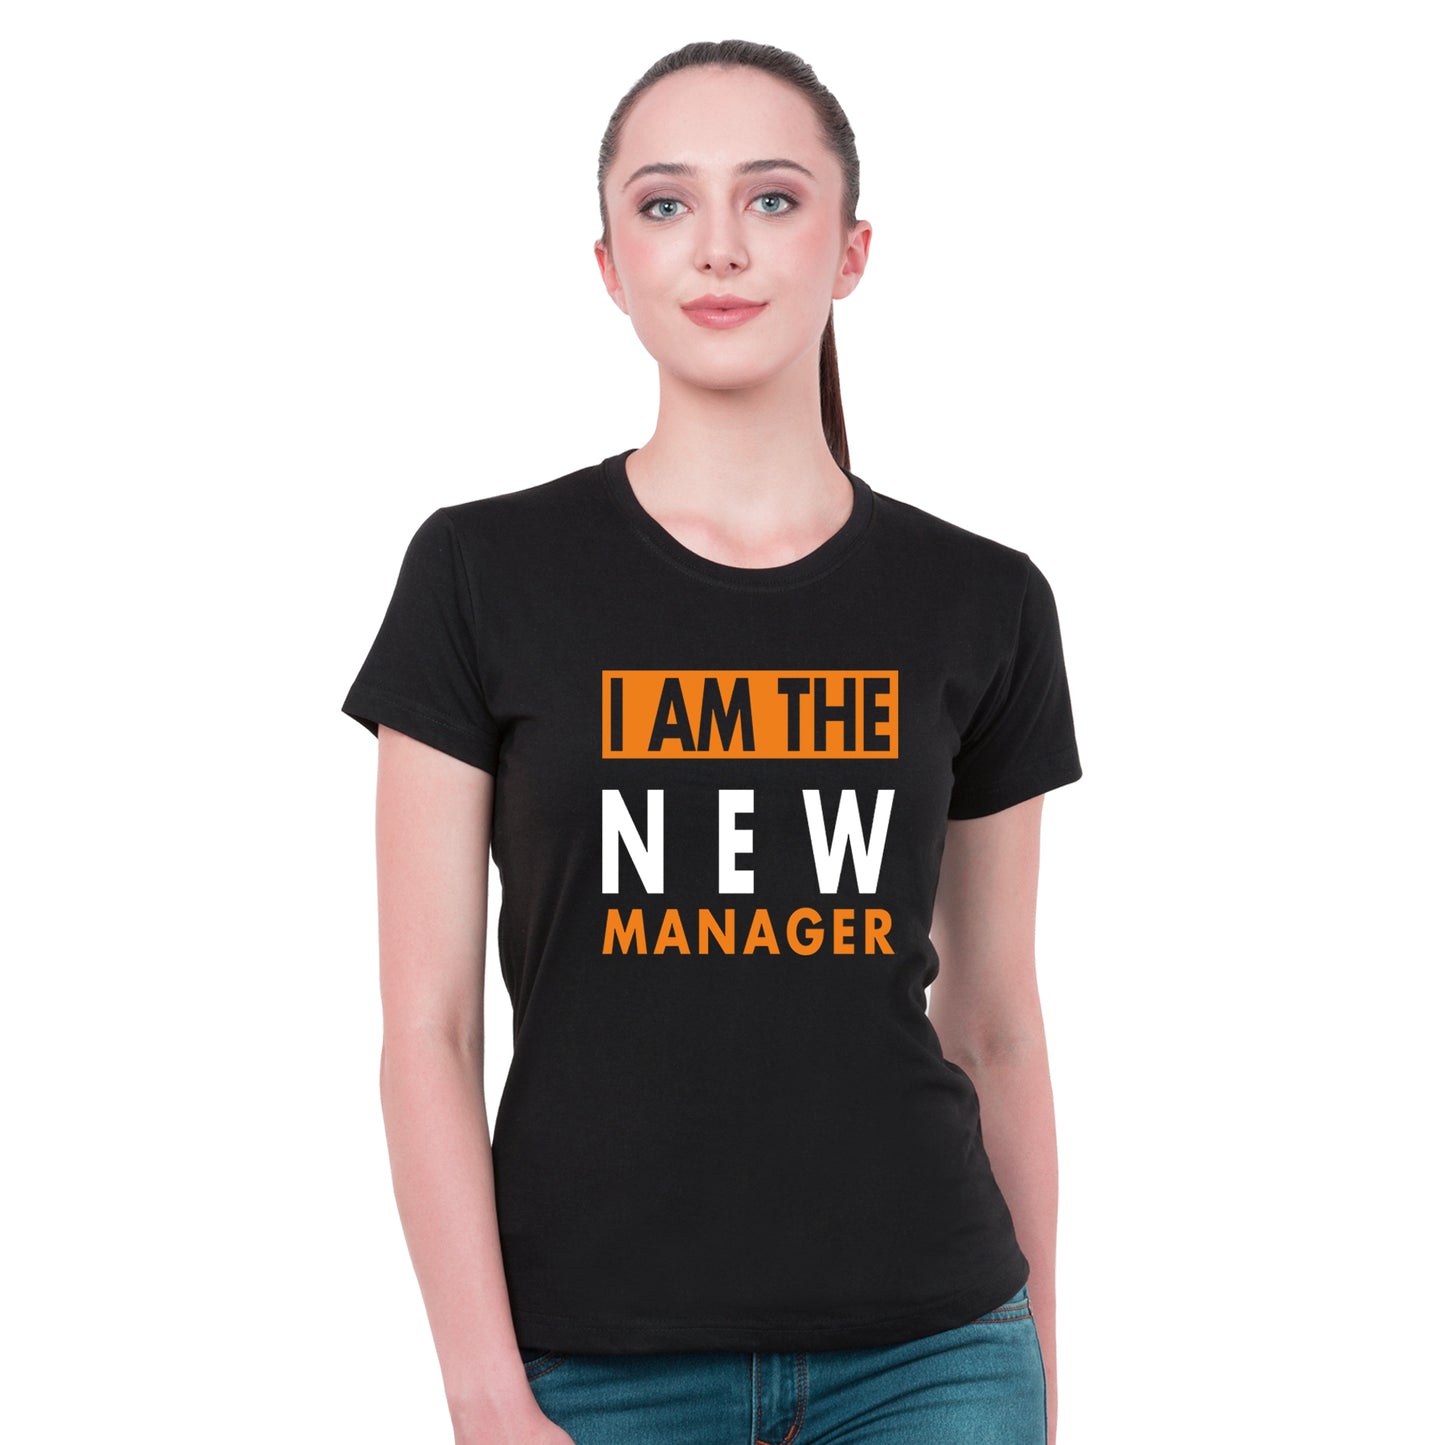 I'm the new manager- under new management matching Couple T shirts- Black